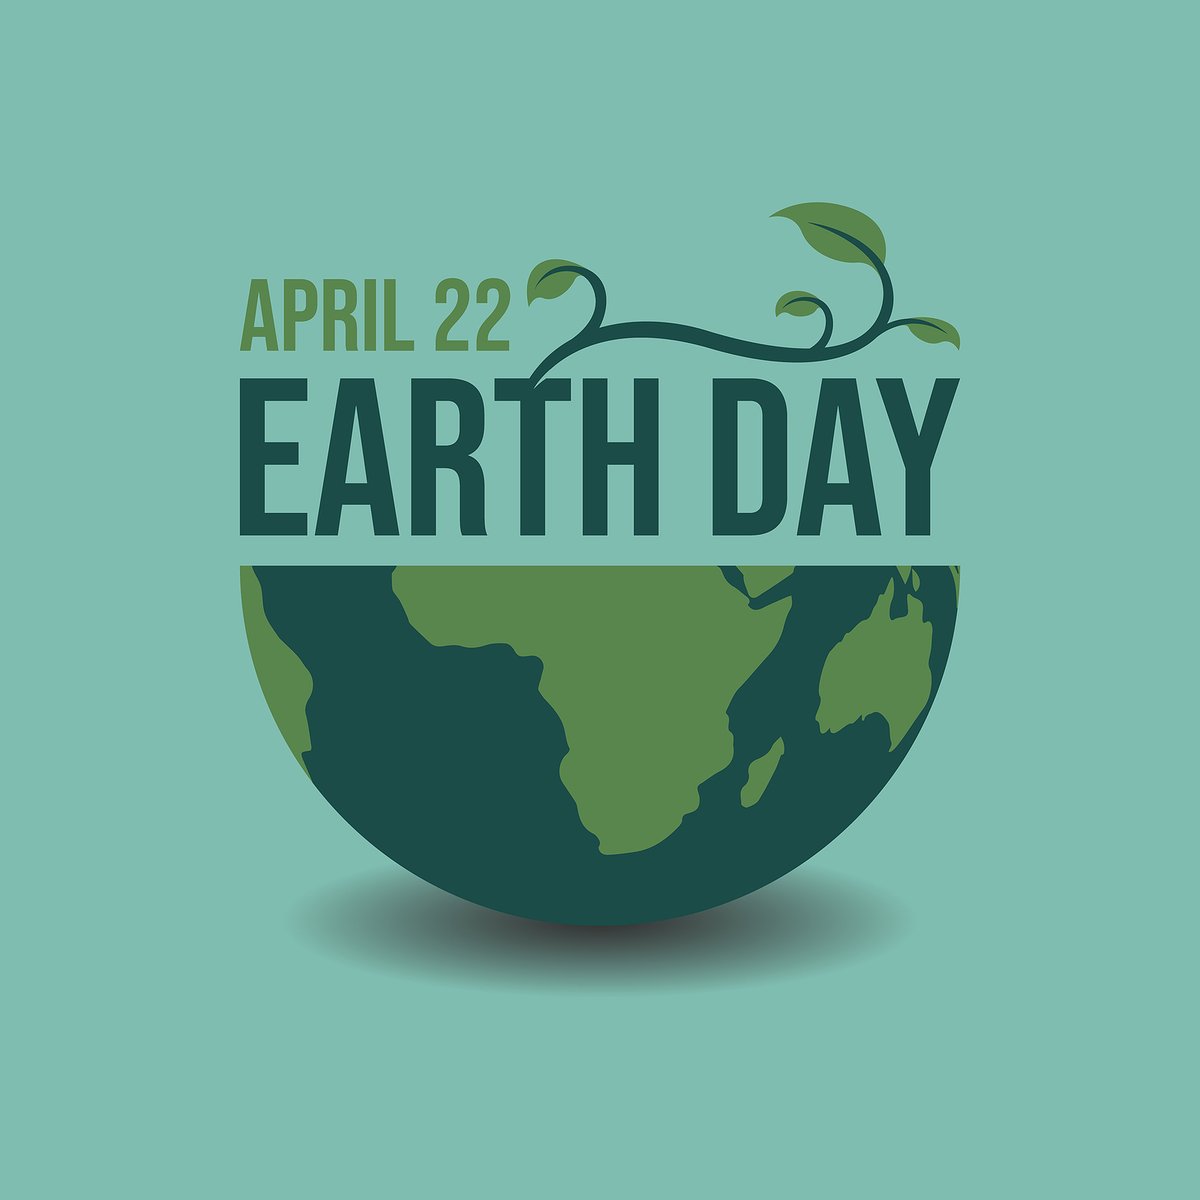 Happy Earth Day from Chicago White Metal! We're proud to prioritize sustainability in our die casting process and beyond. Explore how we're making a difference for our planet with our eco-friendly initiatives: cwmdiecast.com/about-us/envir…

#EarthDay #SustainableManufacturing